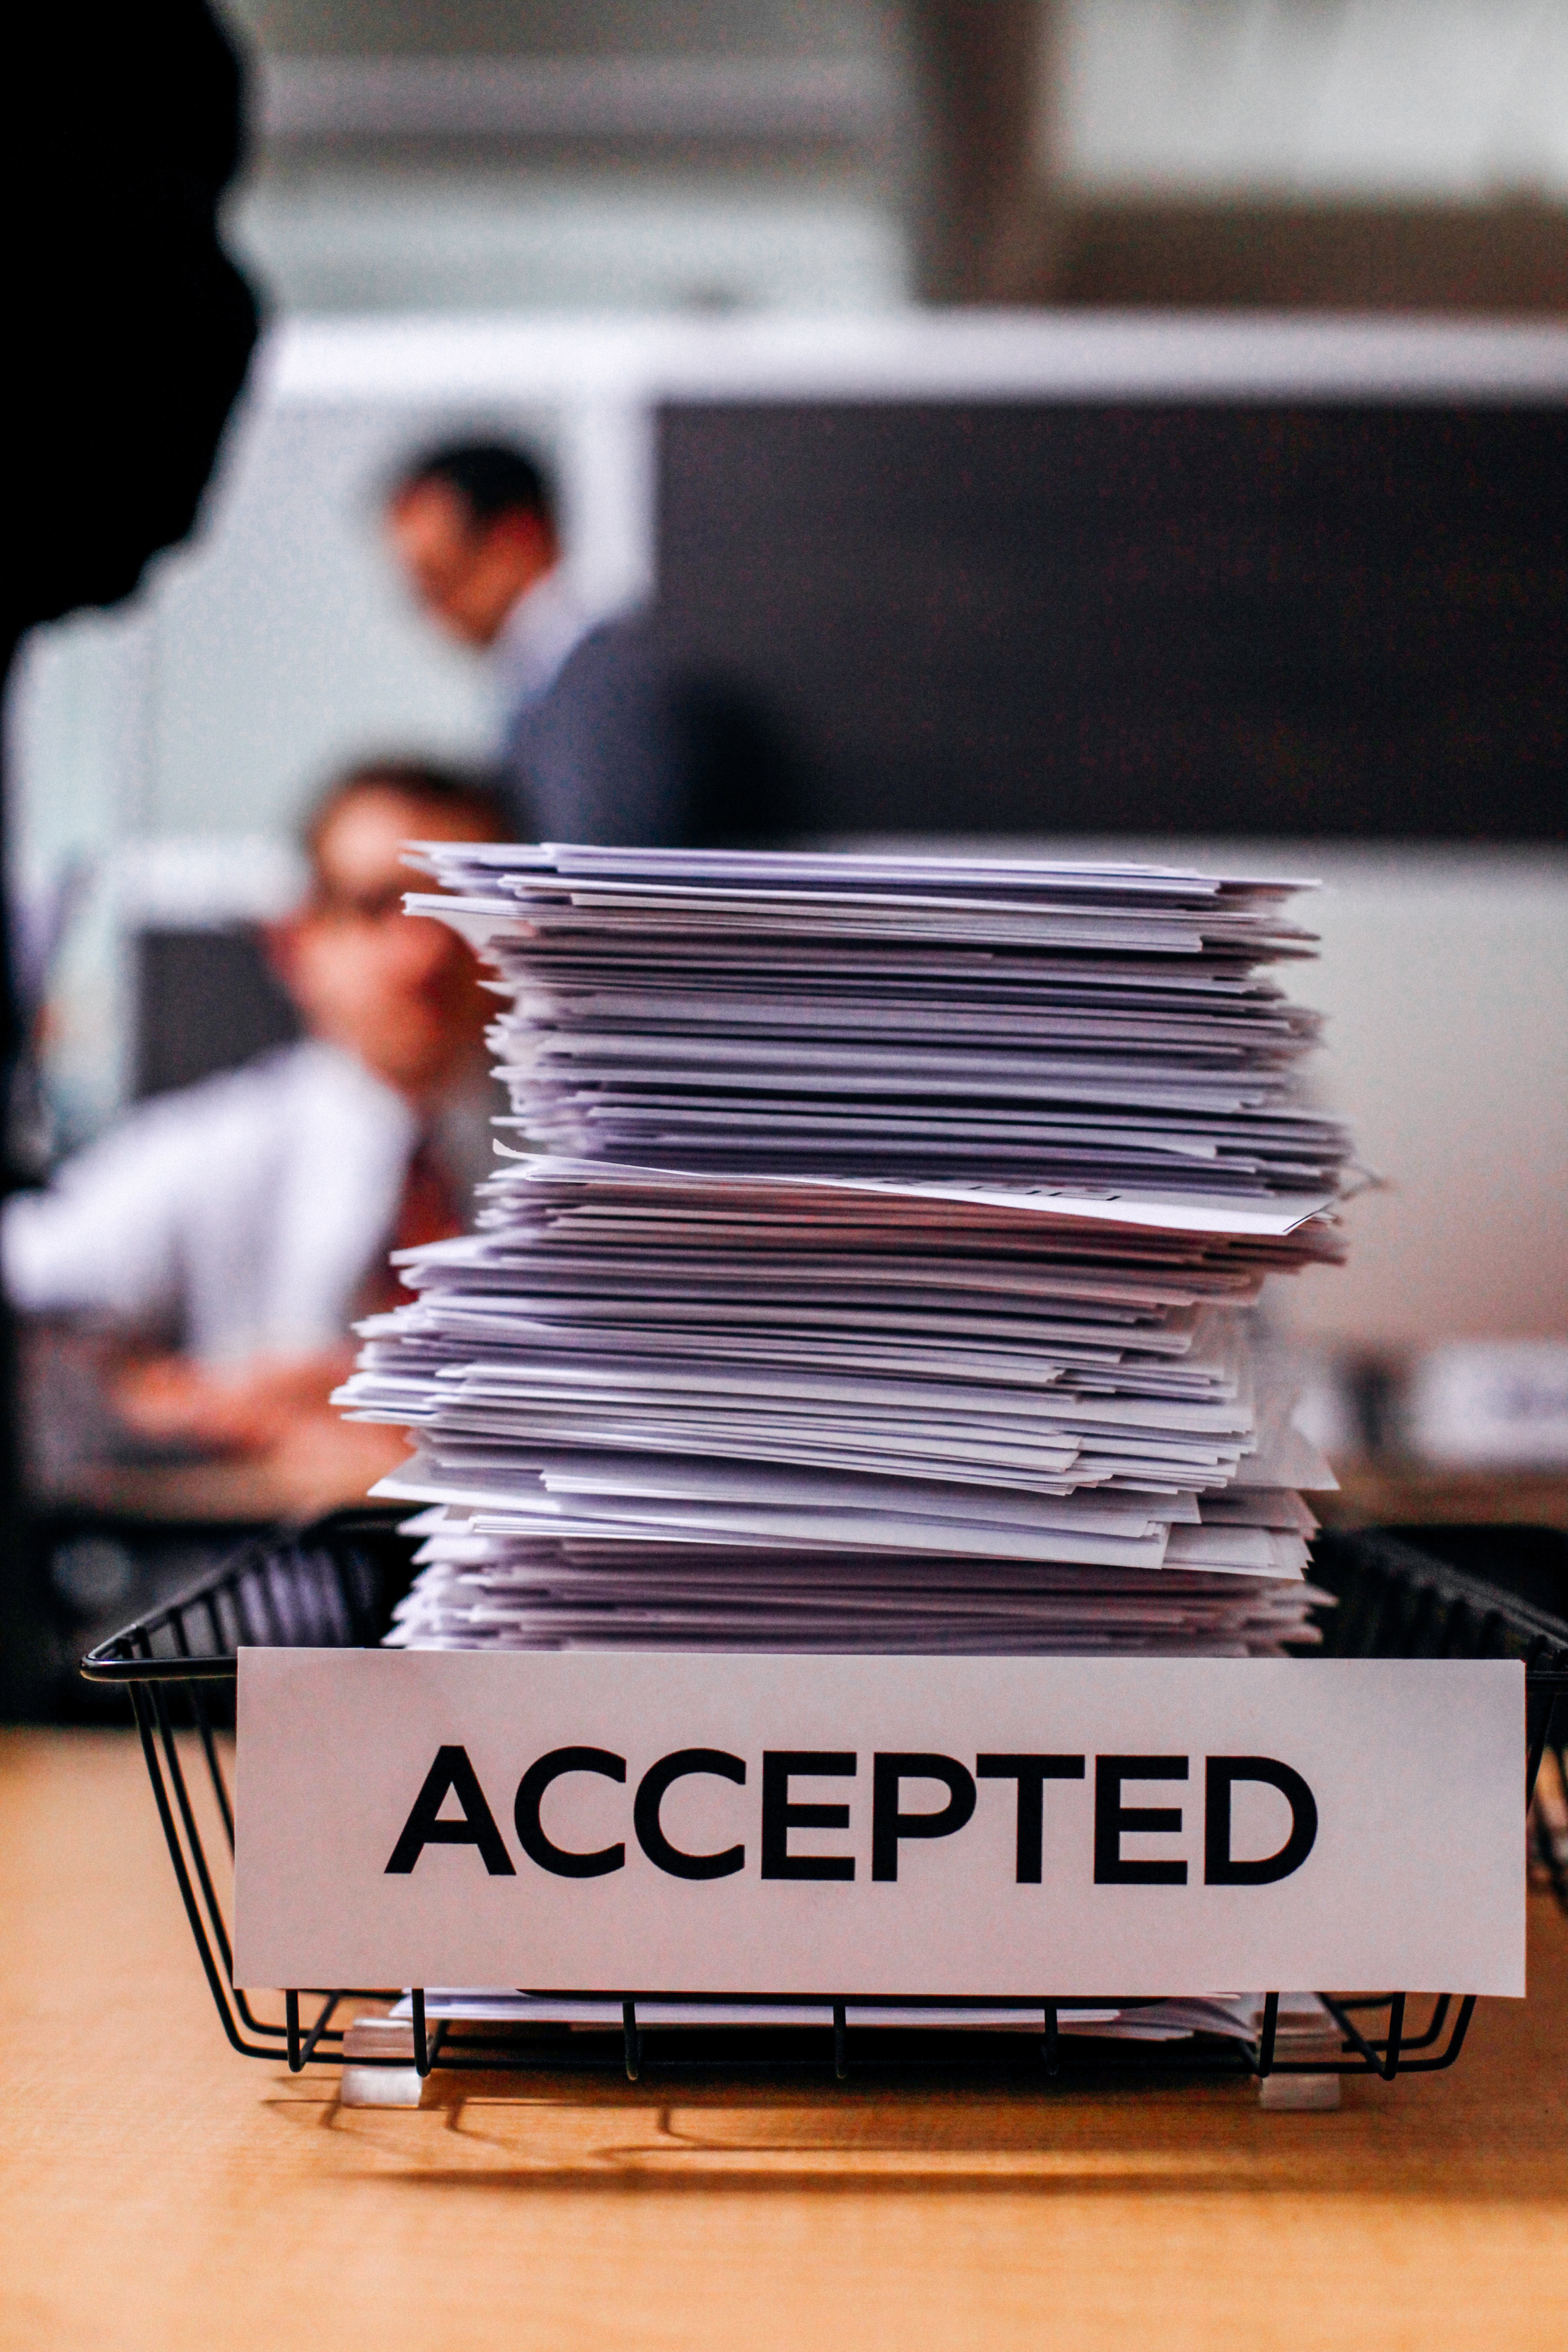 Photo of a stack of paper in a paper bin labelled "Accepted"